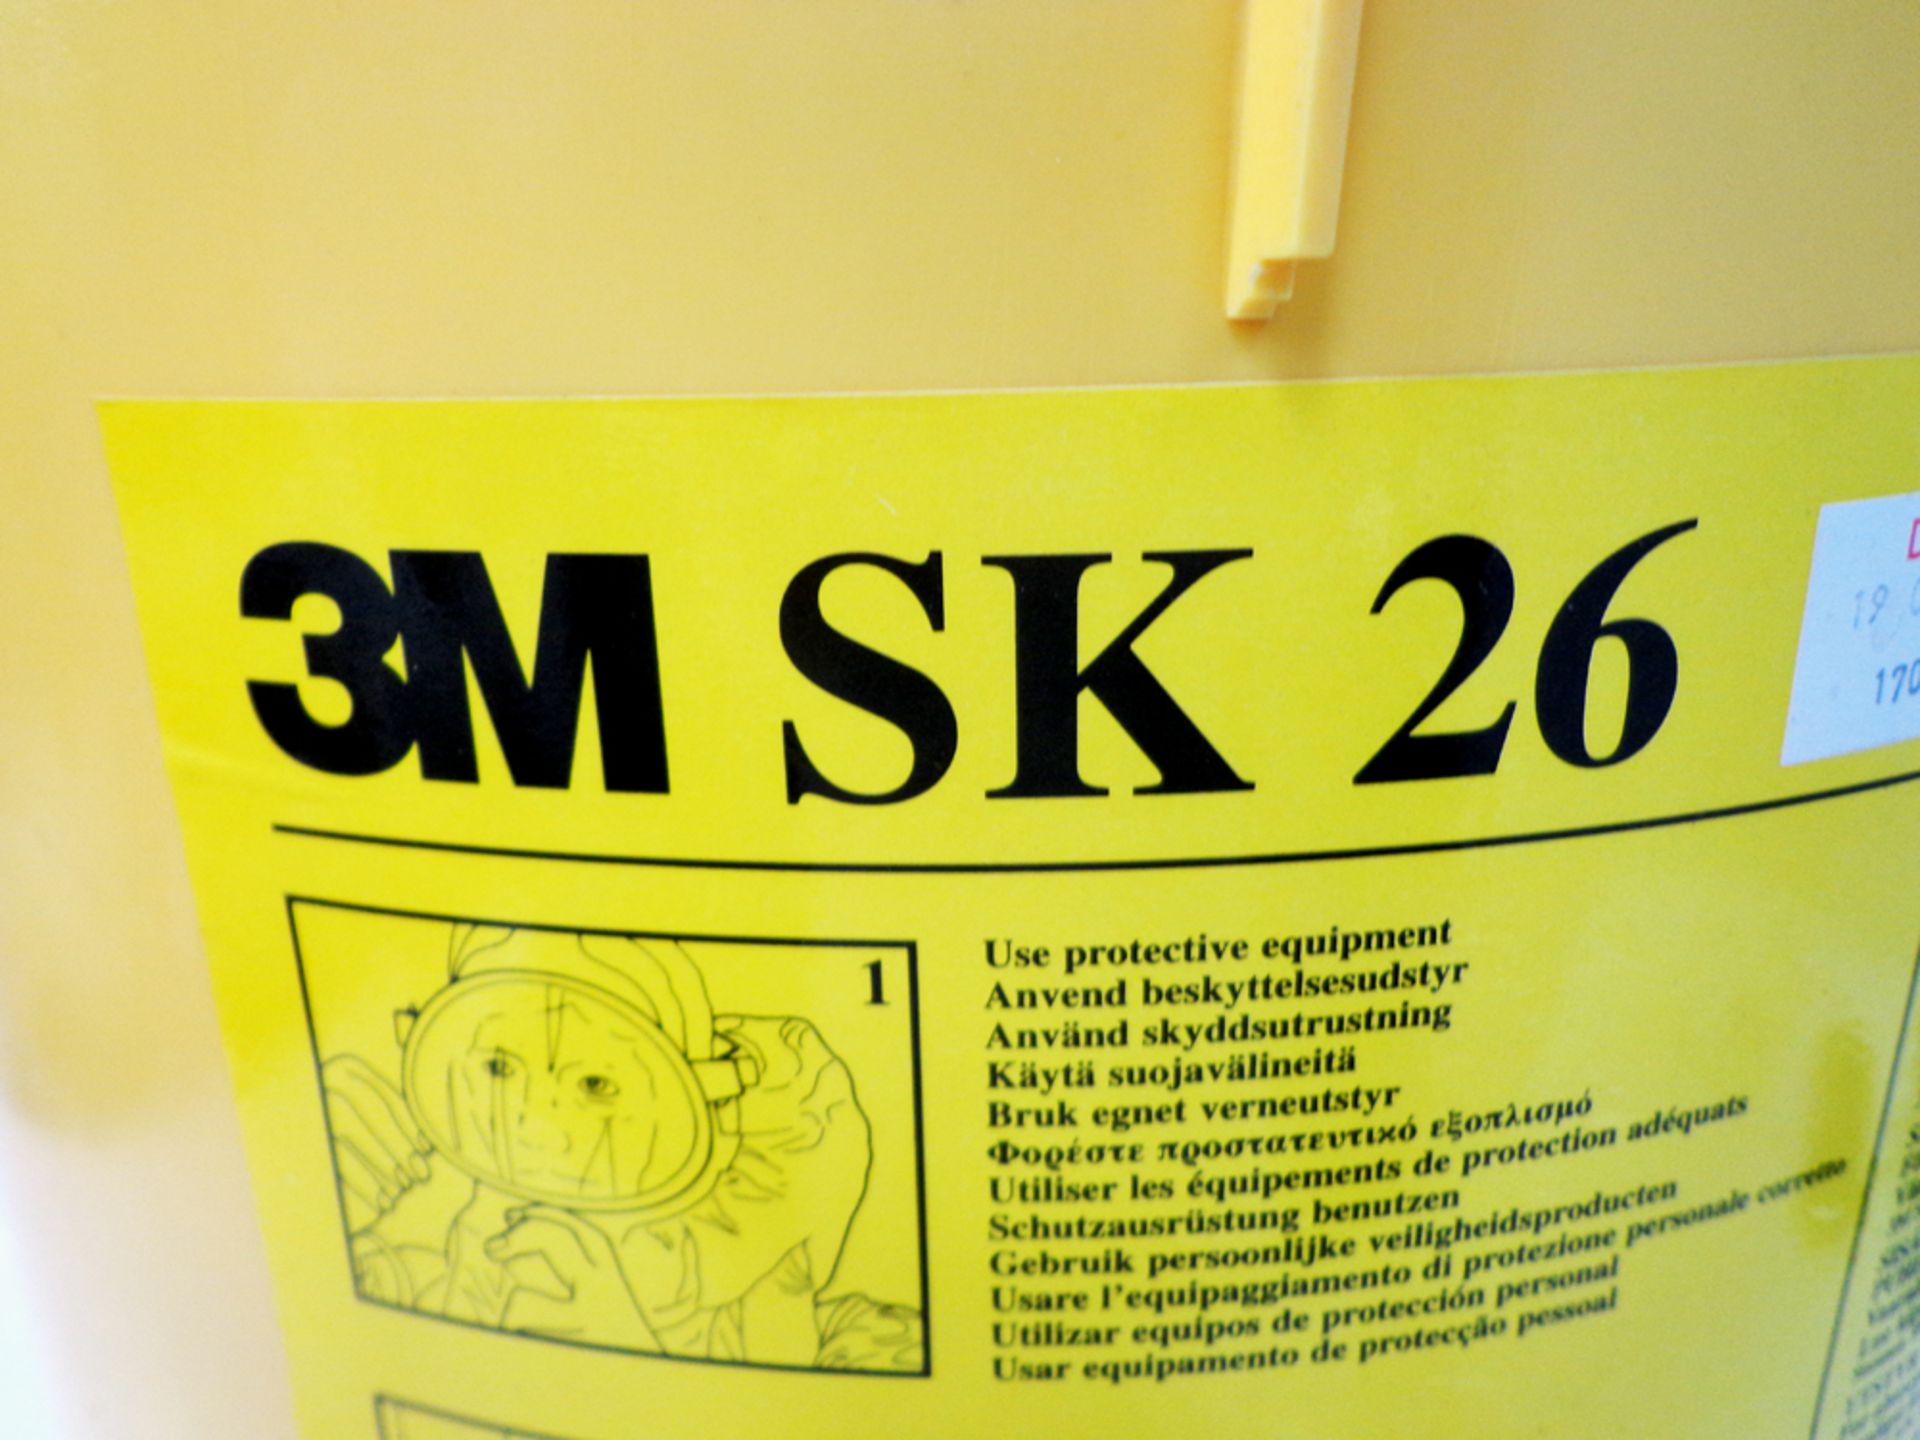 3M SK 26 Chemical Spill Control Kit for Absorption of Hazardous Liquids. - Image 5 of 8